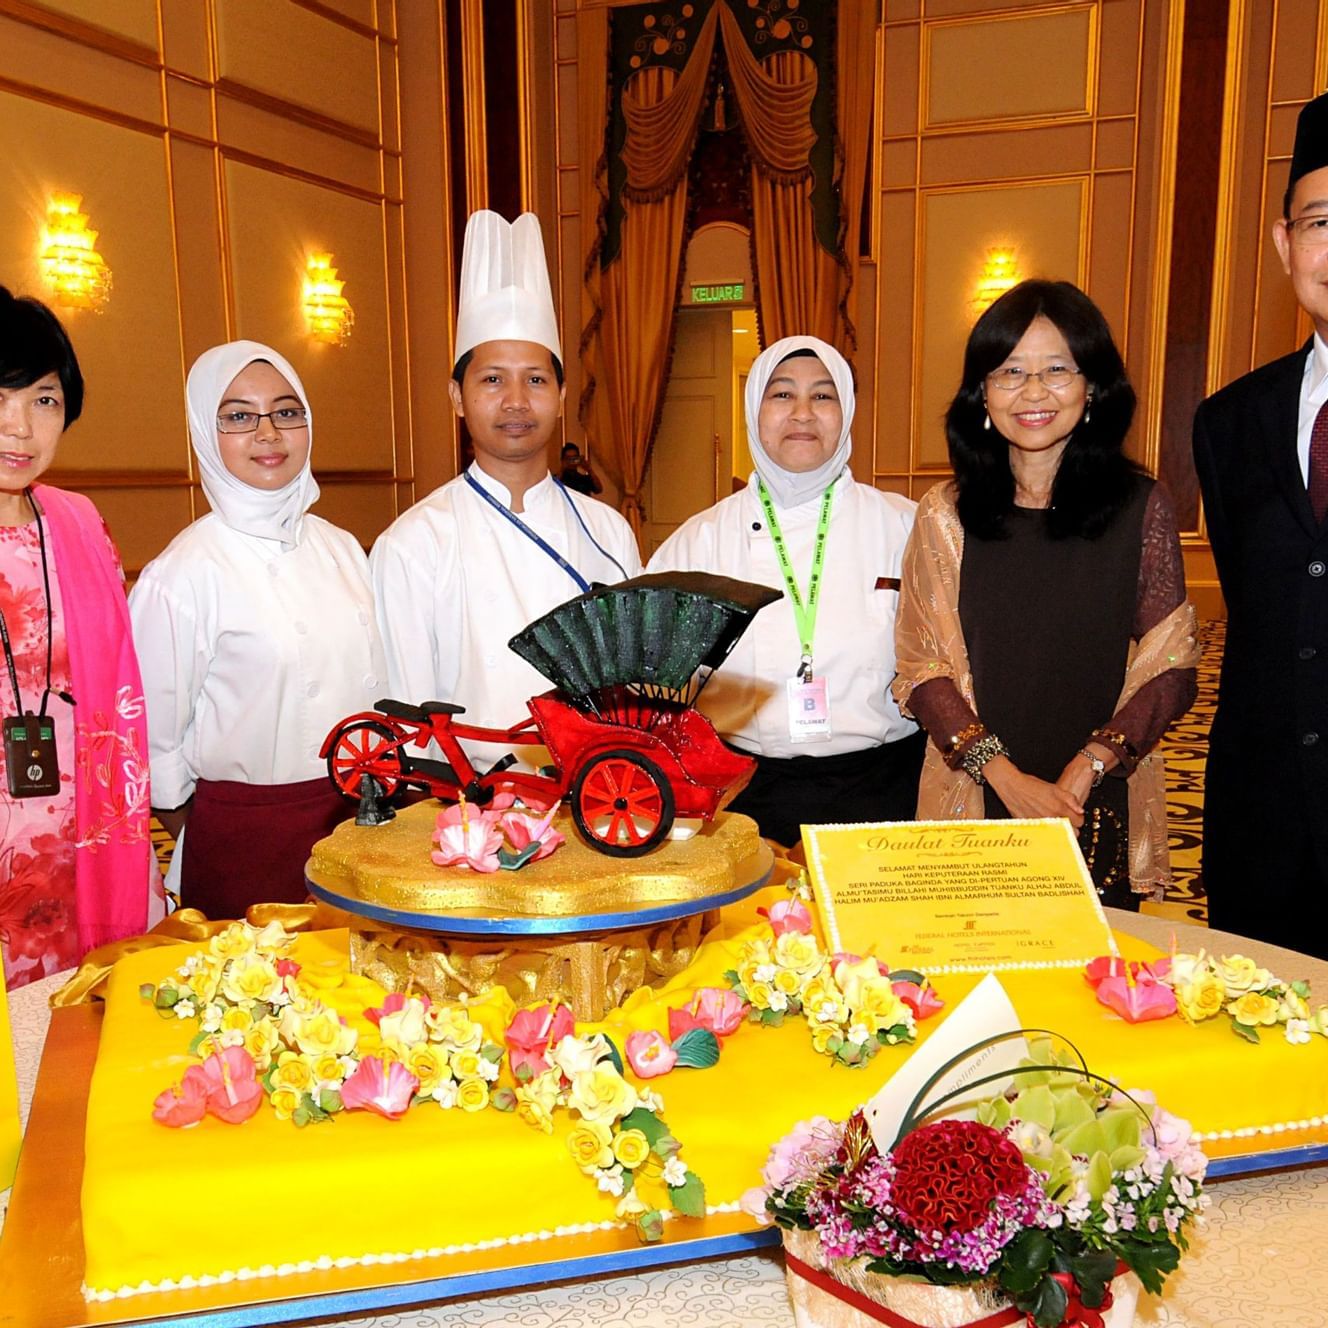 A group presented a cake to the king & queen at Federal Hotels